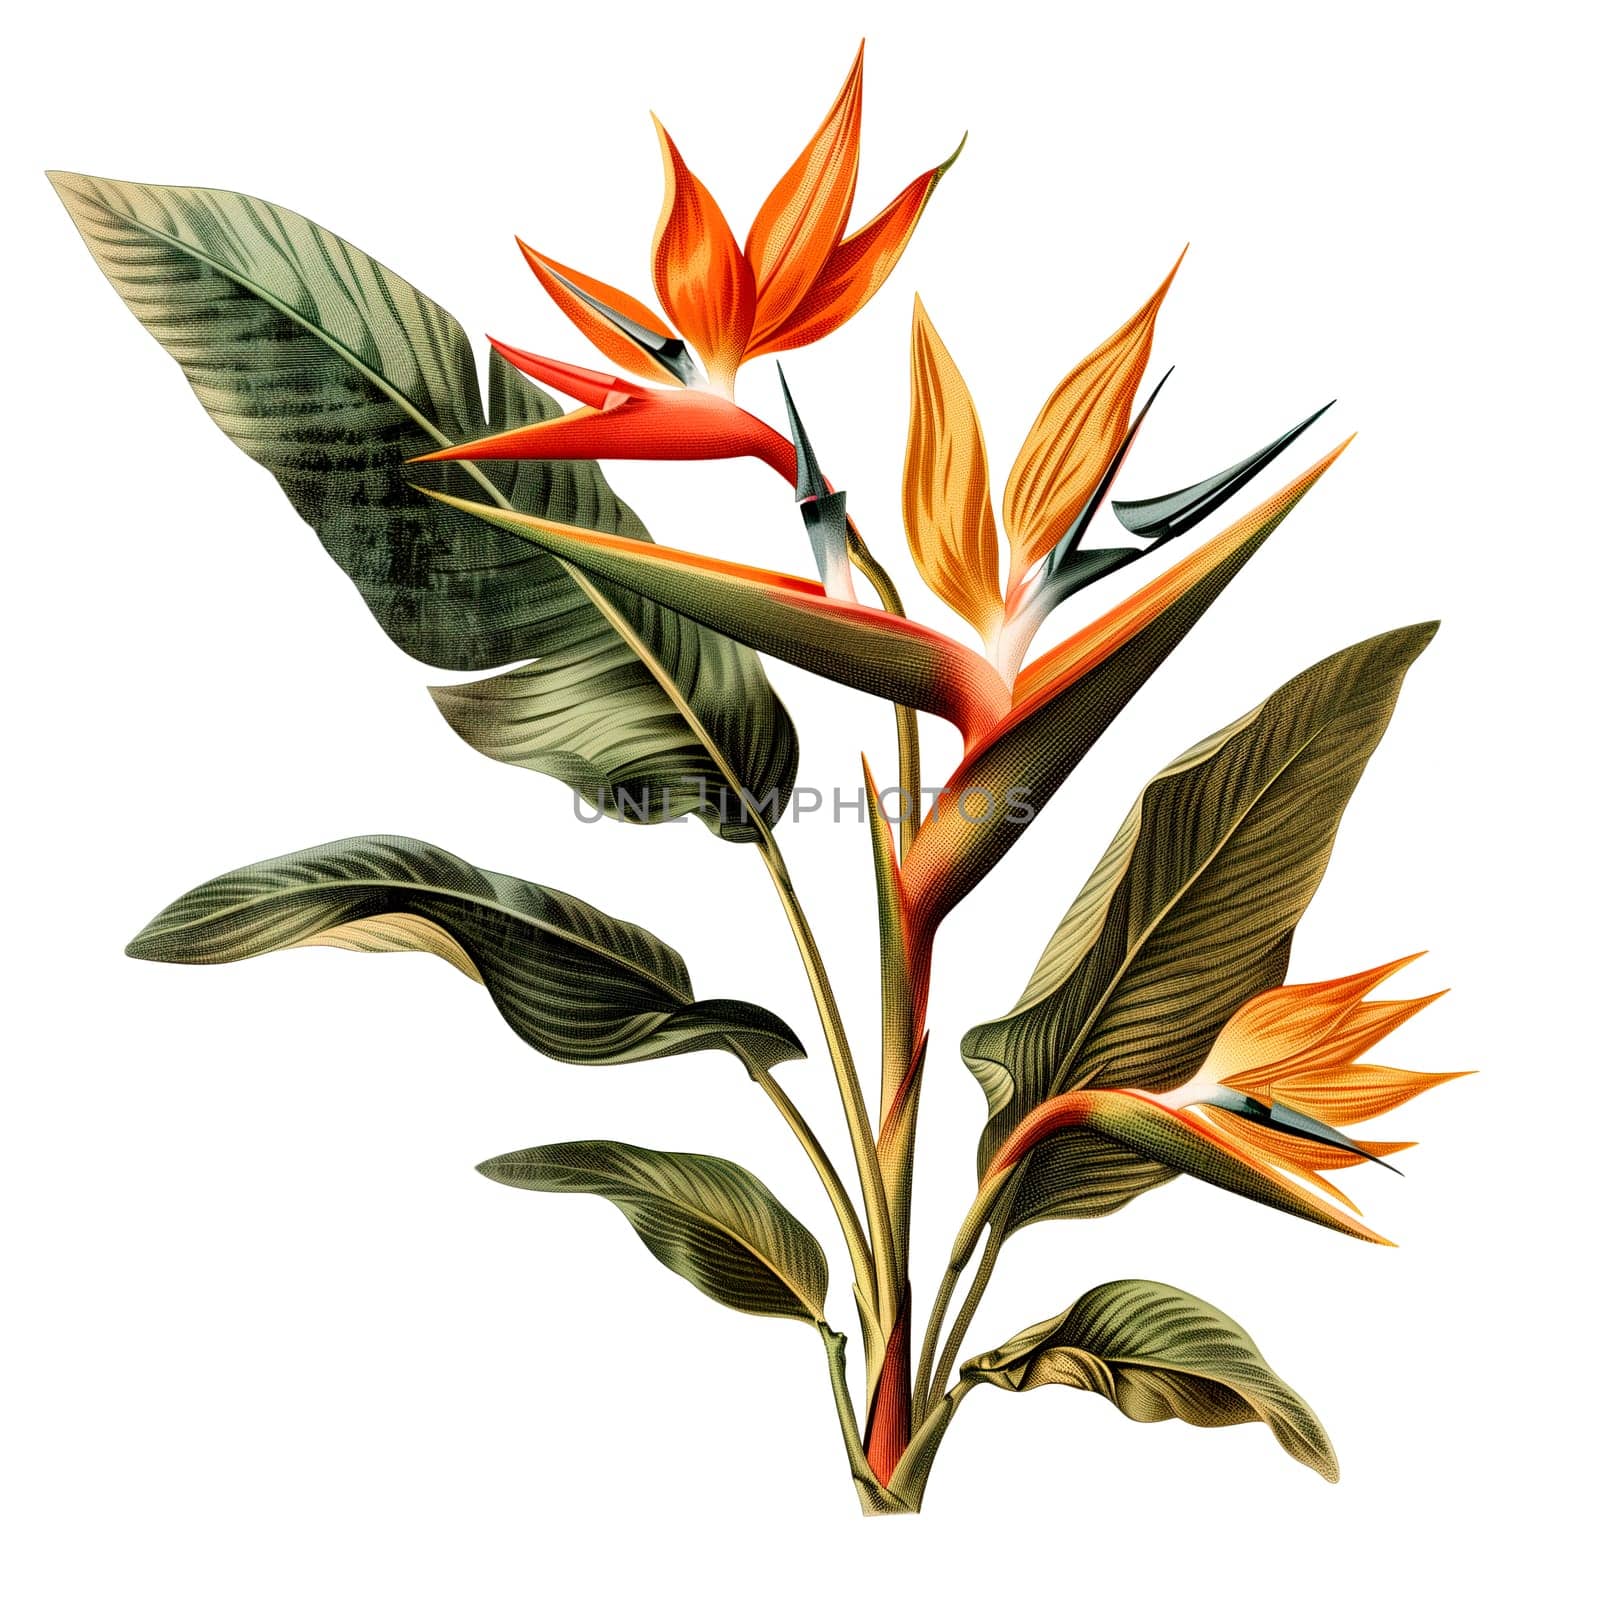 Isolated illustration of bird of paradise plant by Dustick